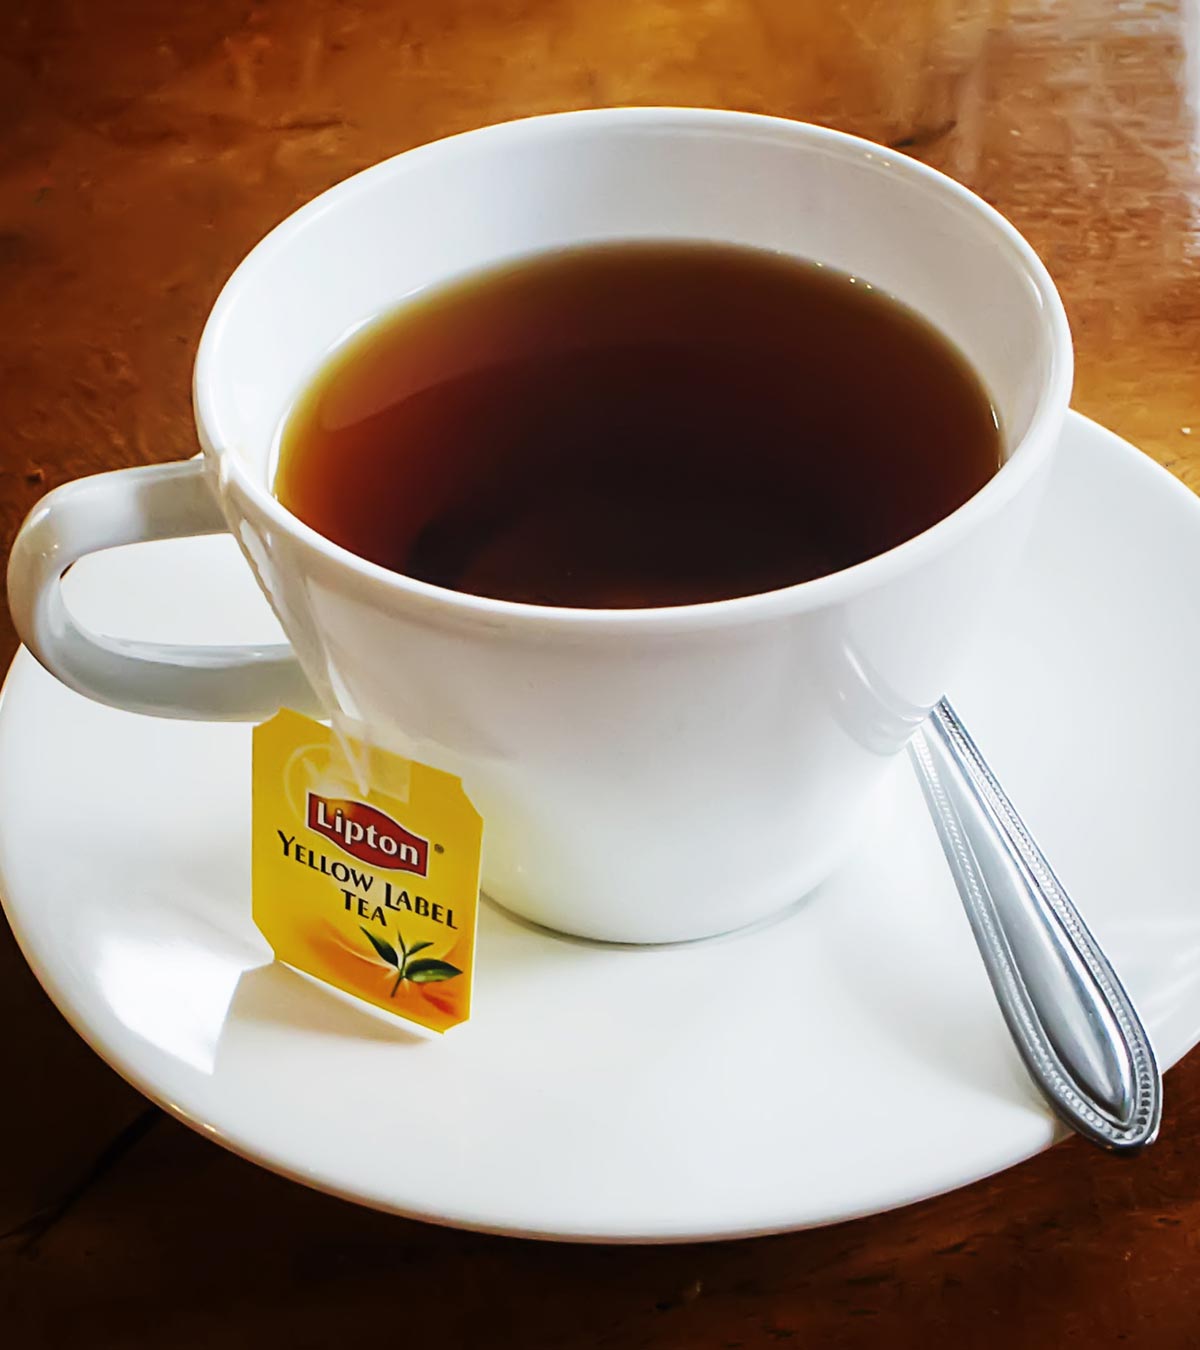 Is It Safe To Have Lipton Tea During Pregnancy?